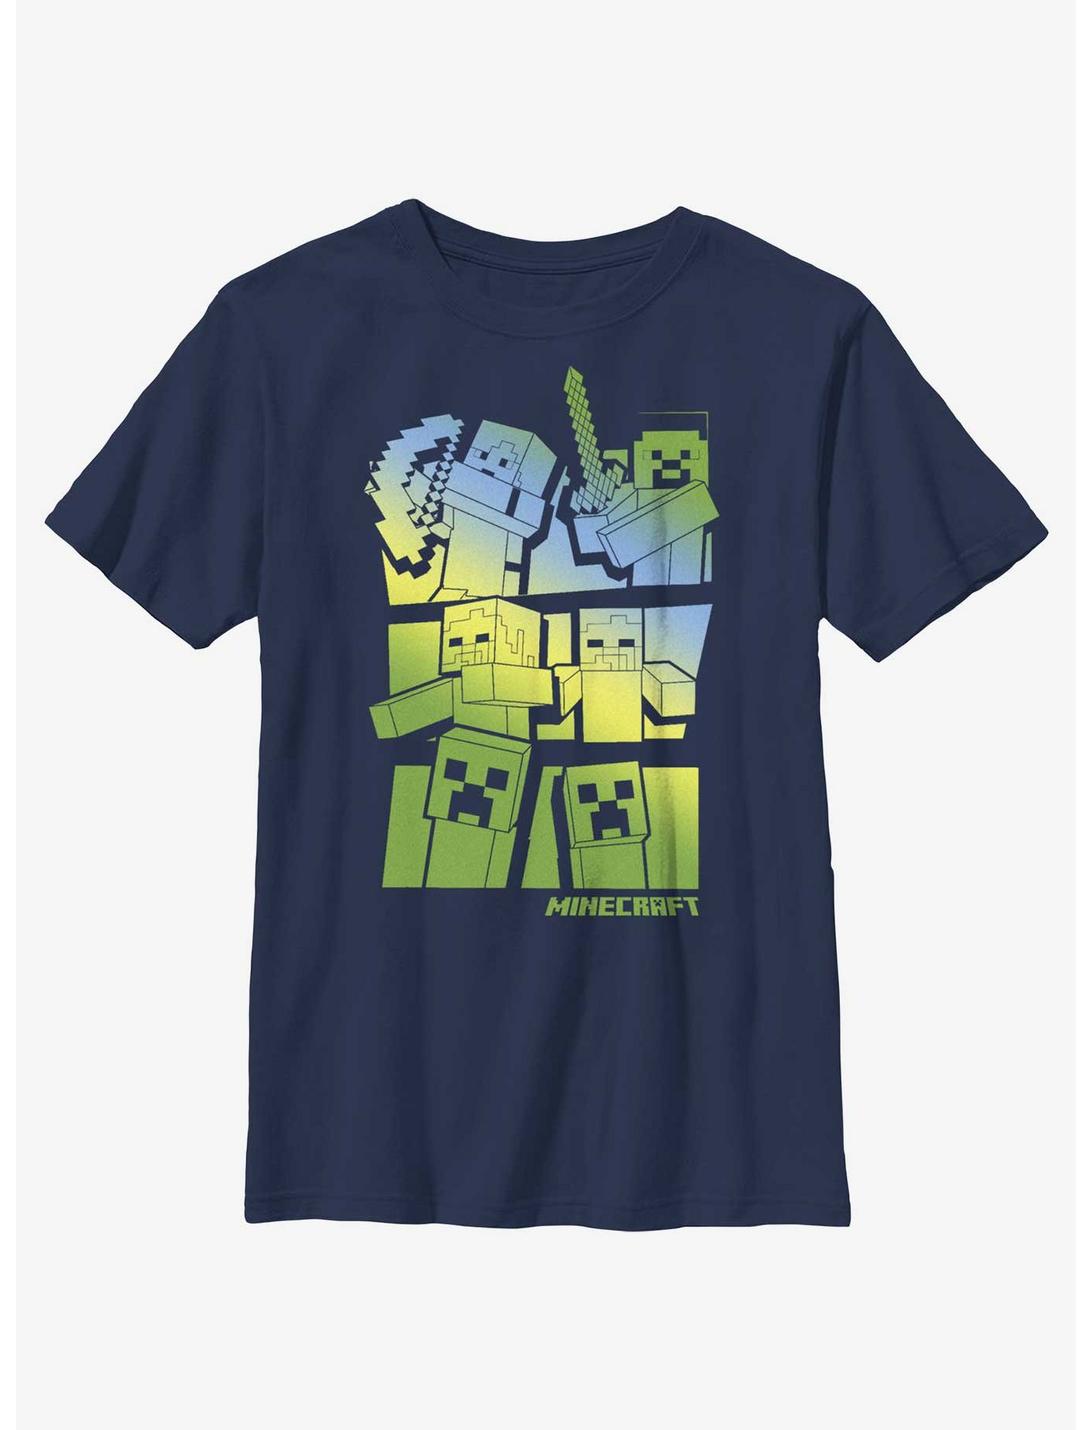 Minecraft Story Gradient Youth T-Shirt, NAVY, hi-res